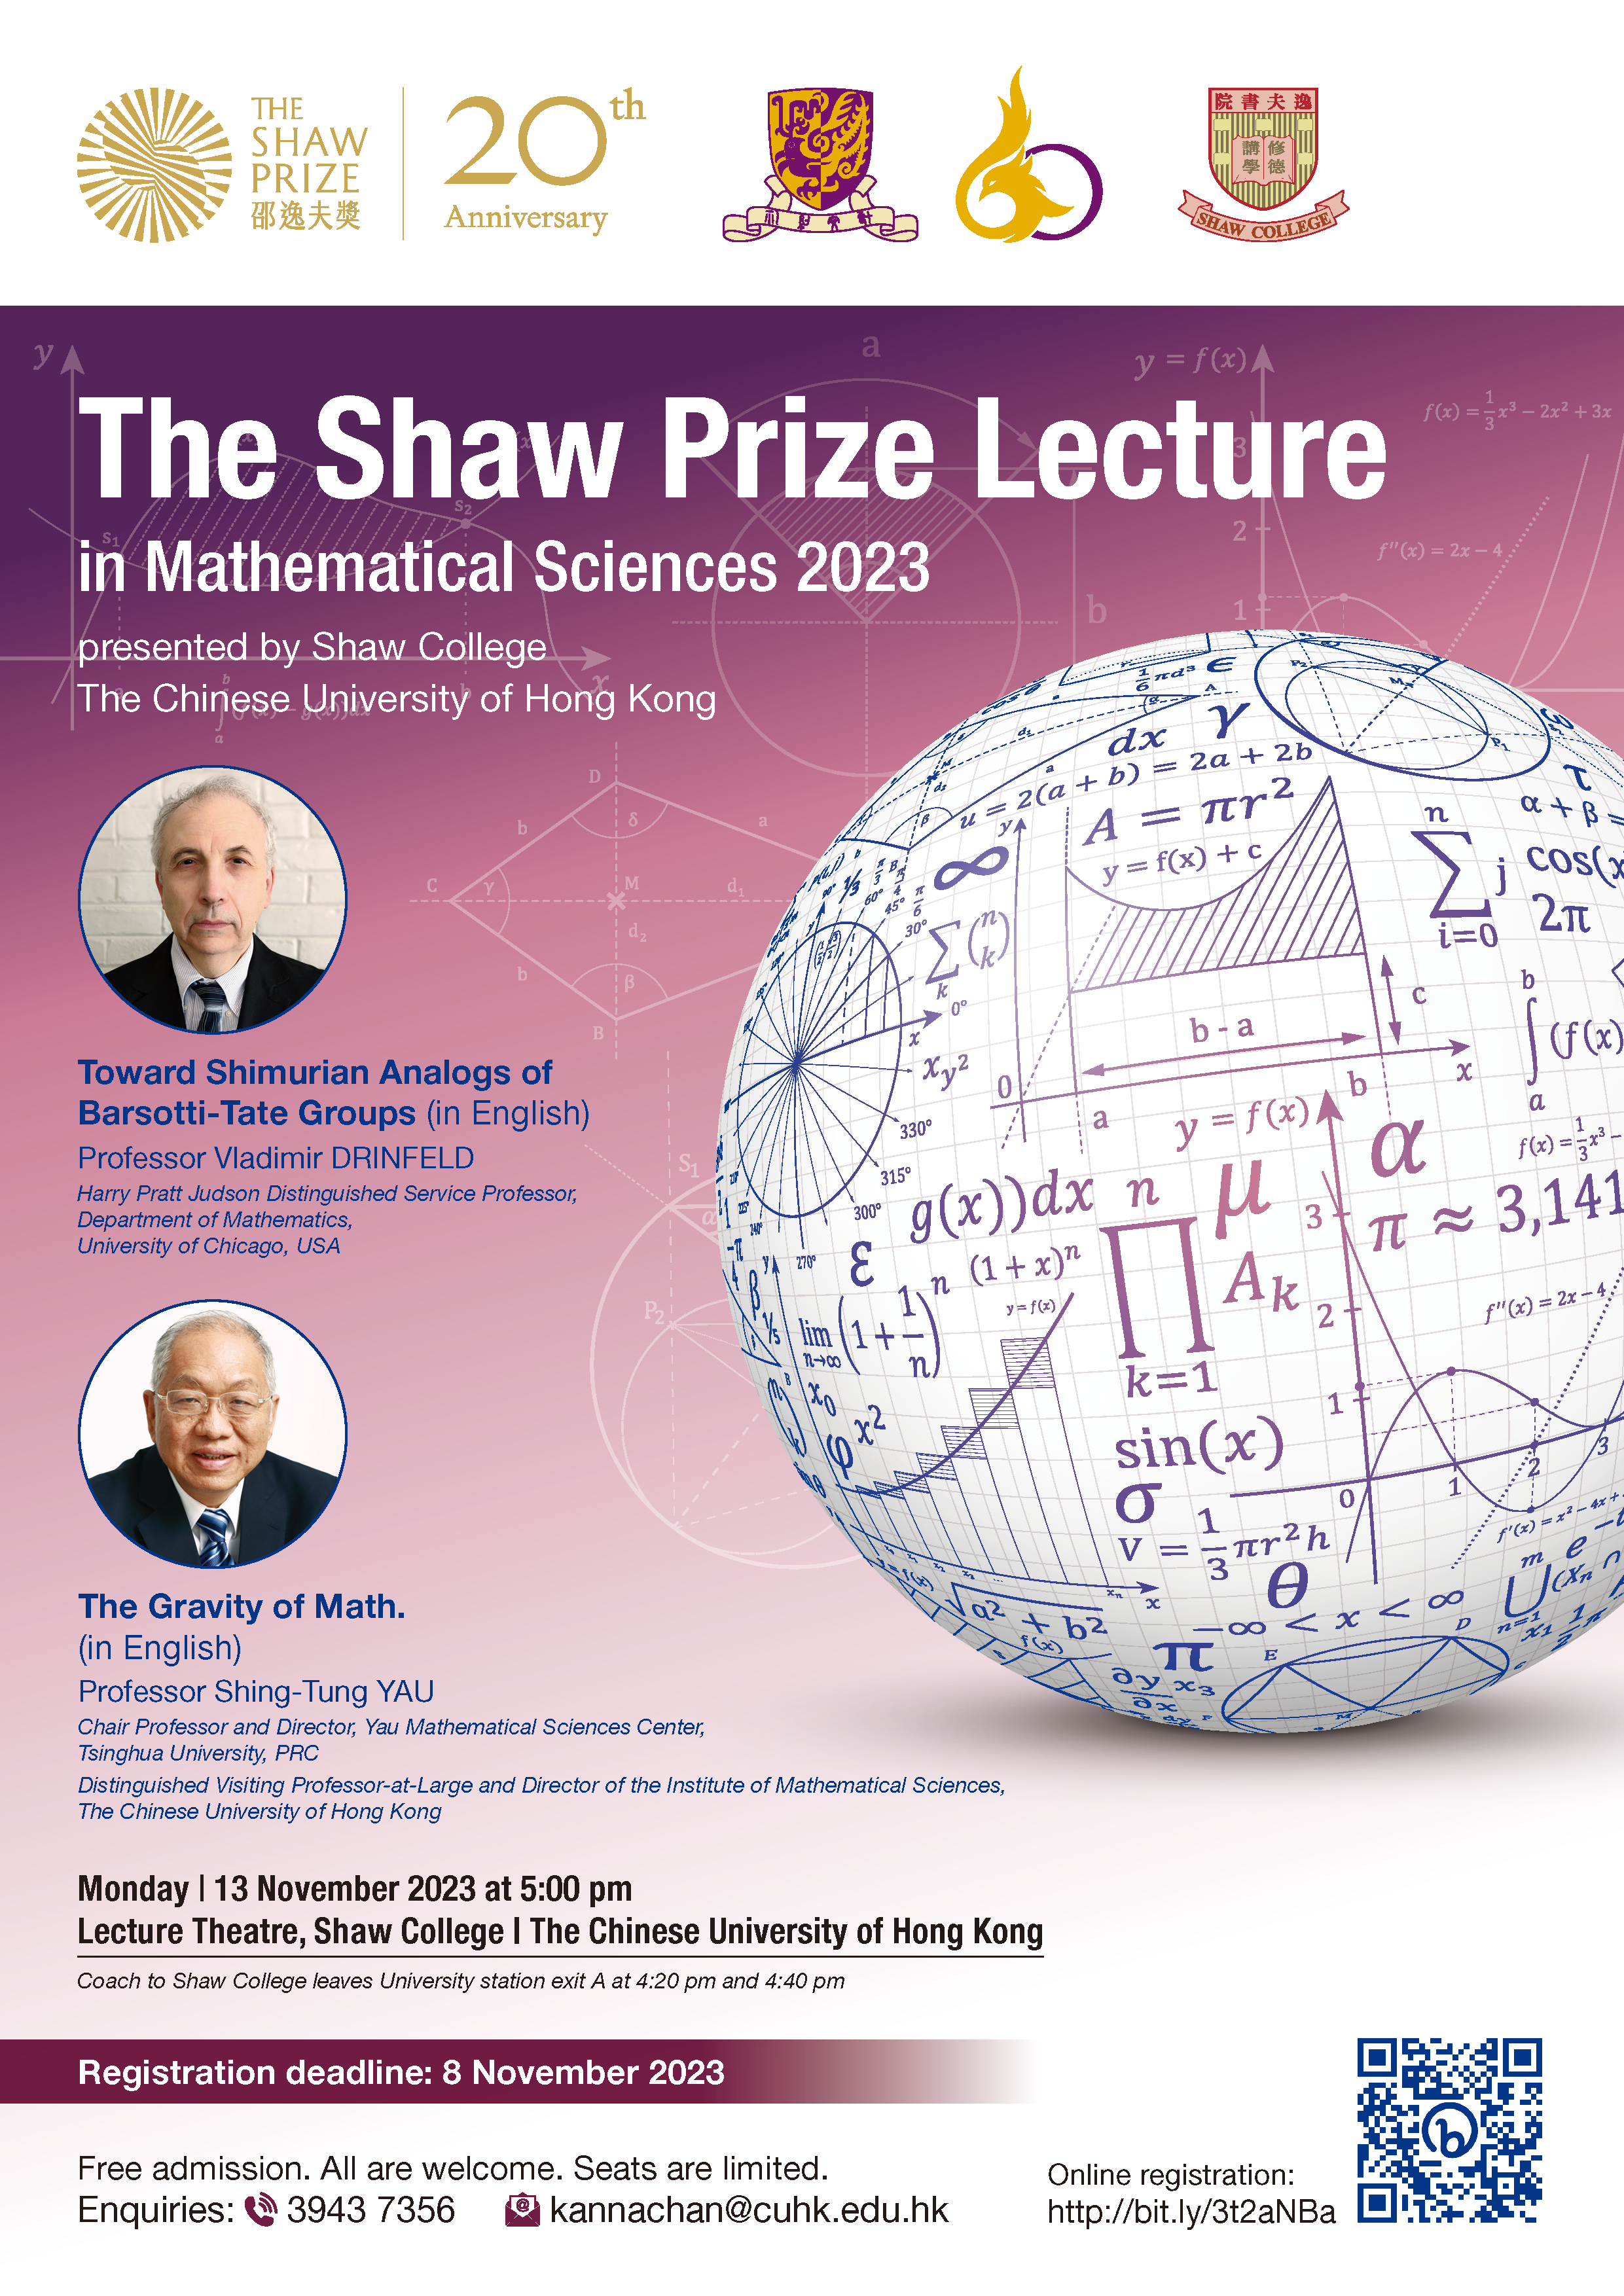 The Shaw Prize Lecture 2023